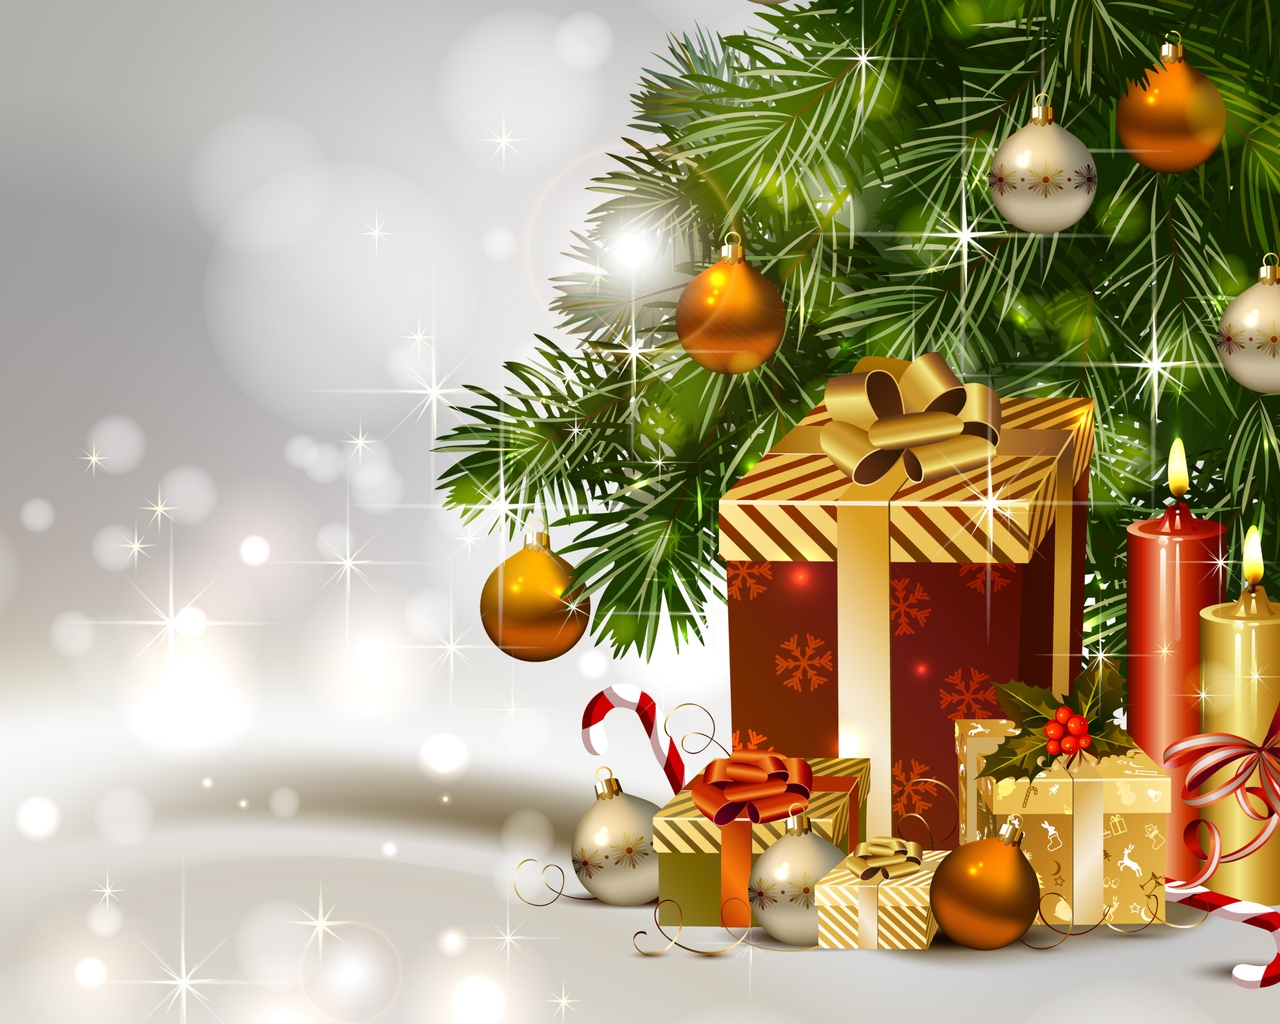 Gifts Under Christmas Tree for 1280 x 1024 resolution